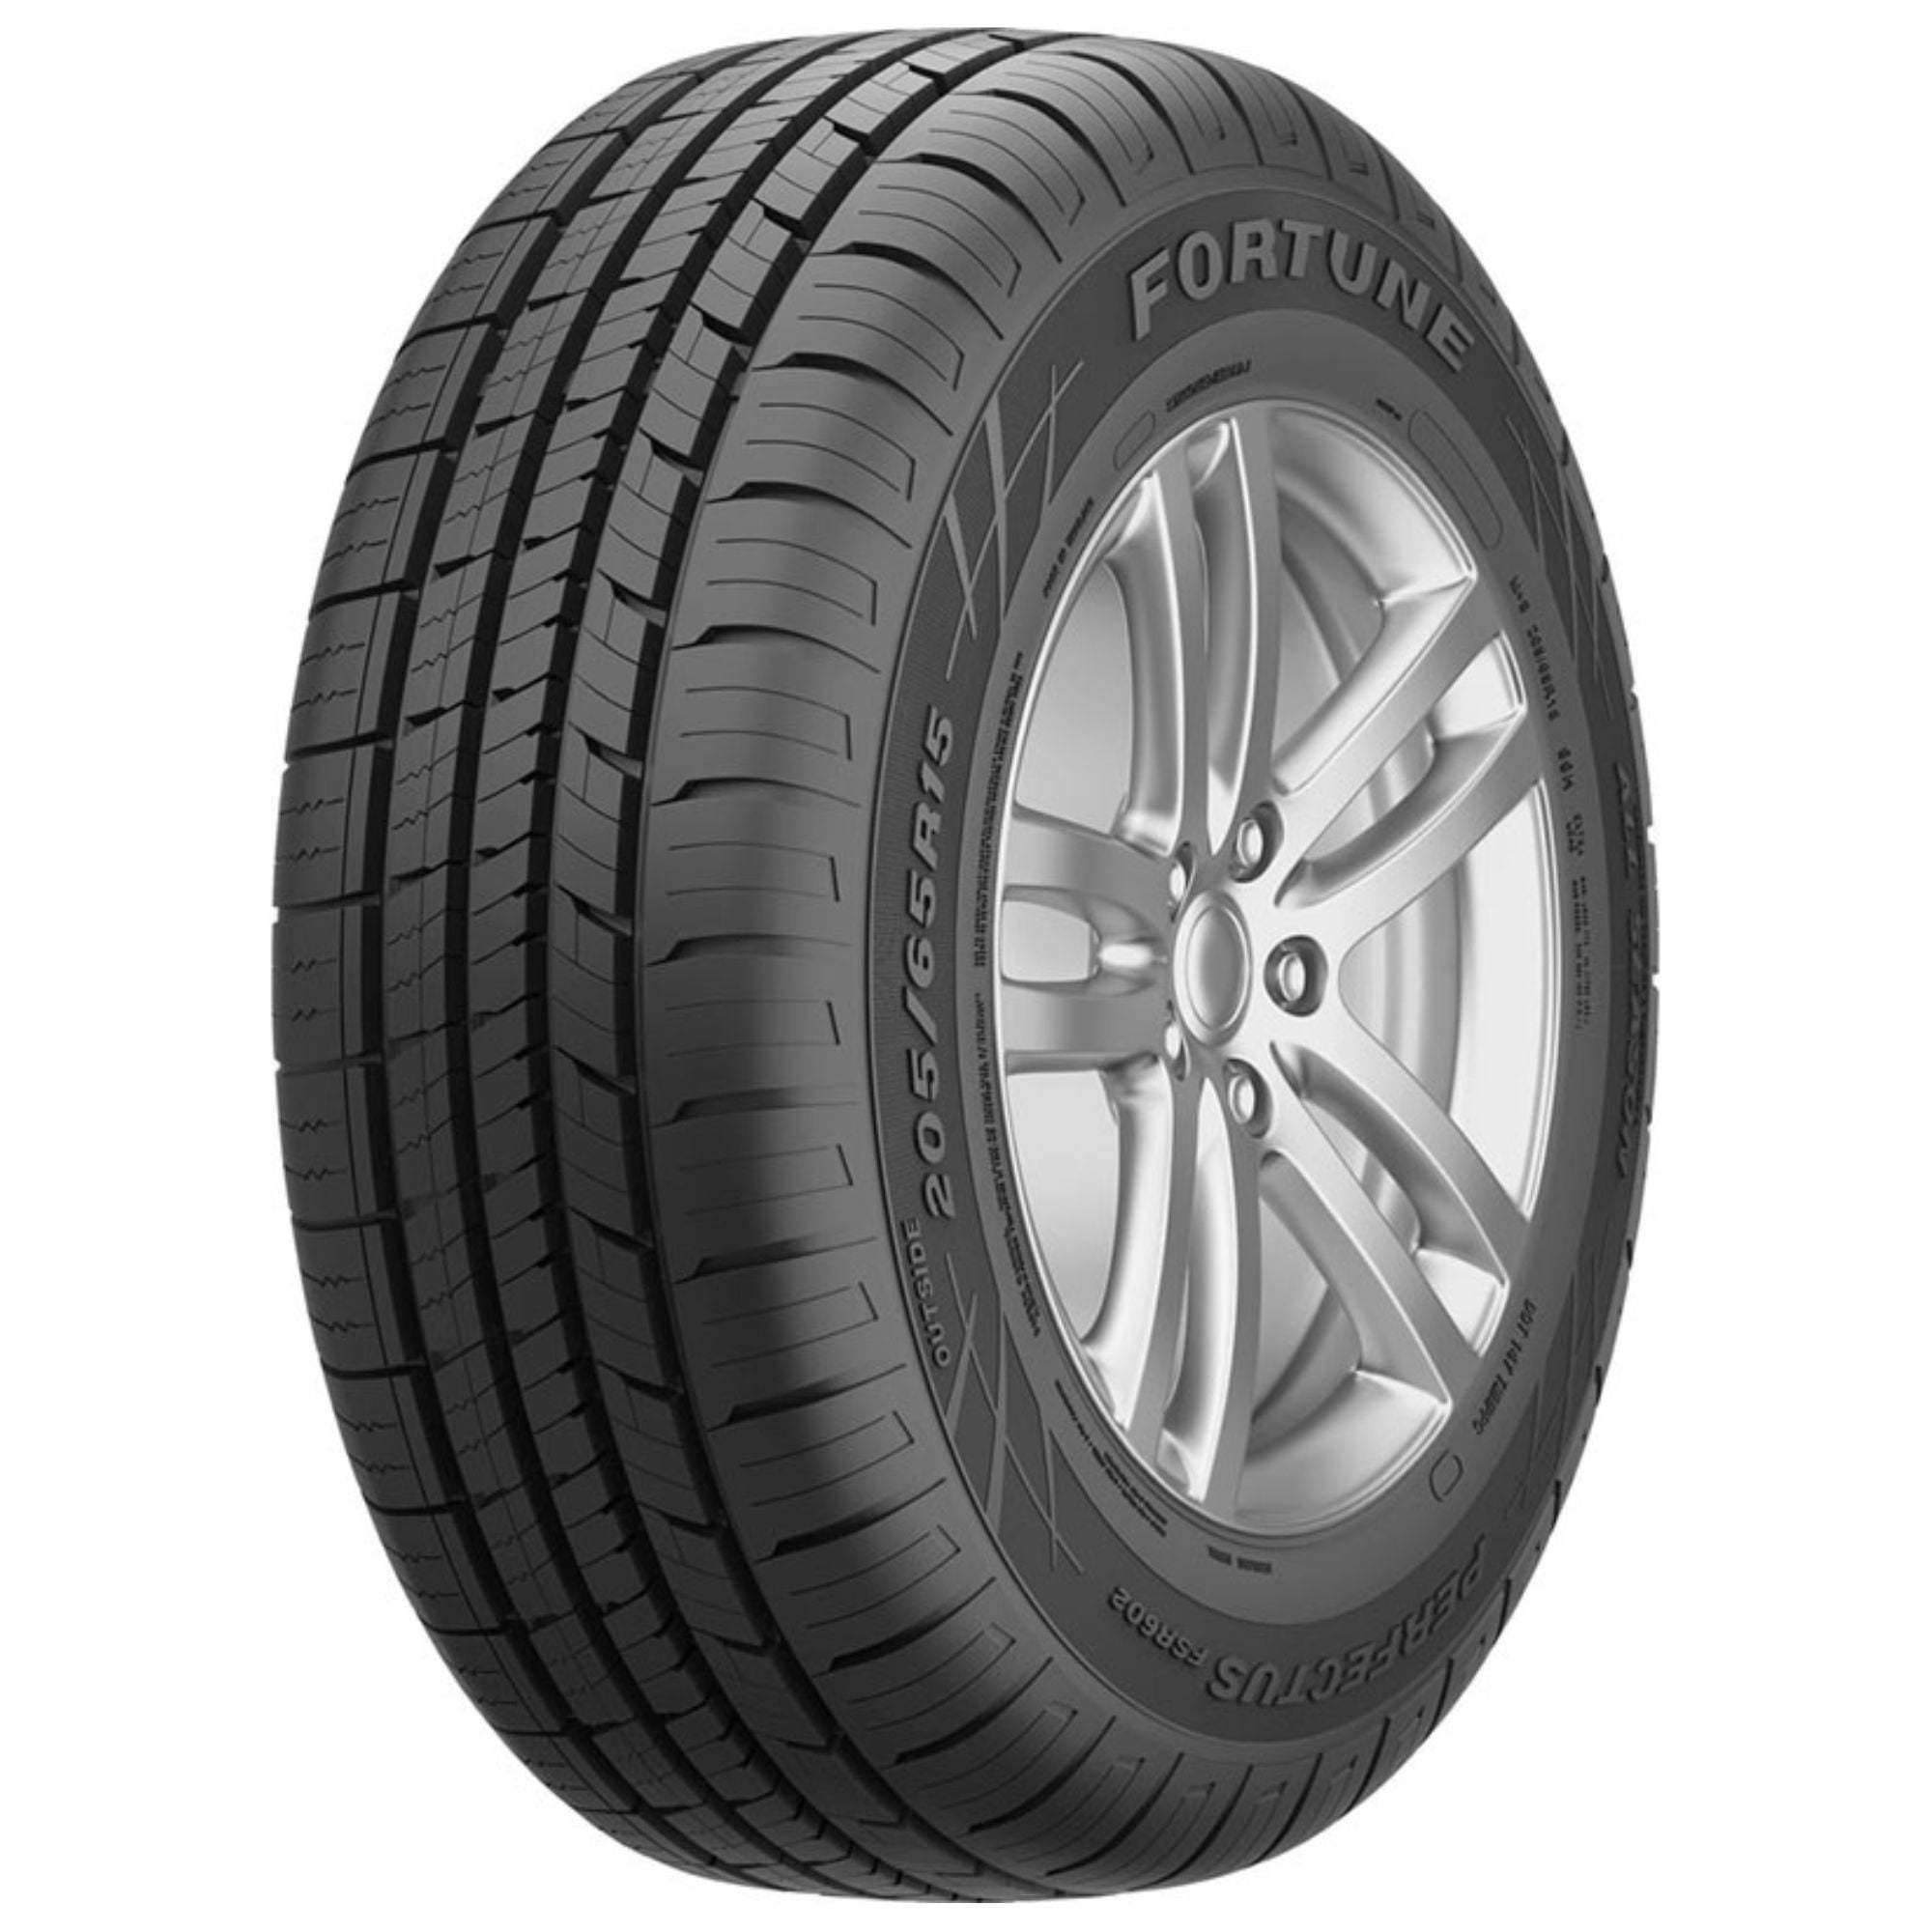 Continental TrueContact Tour 175/65R15 BSW Tire All Season 84H